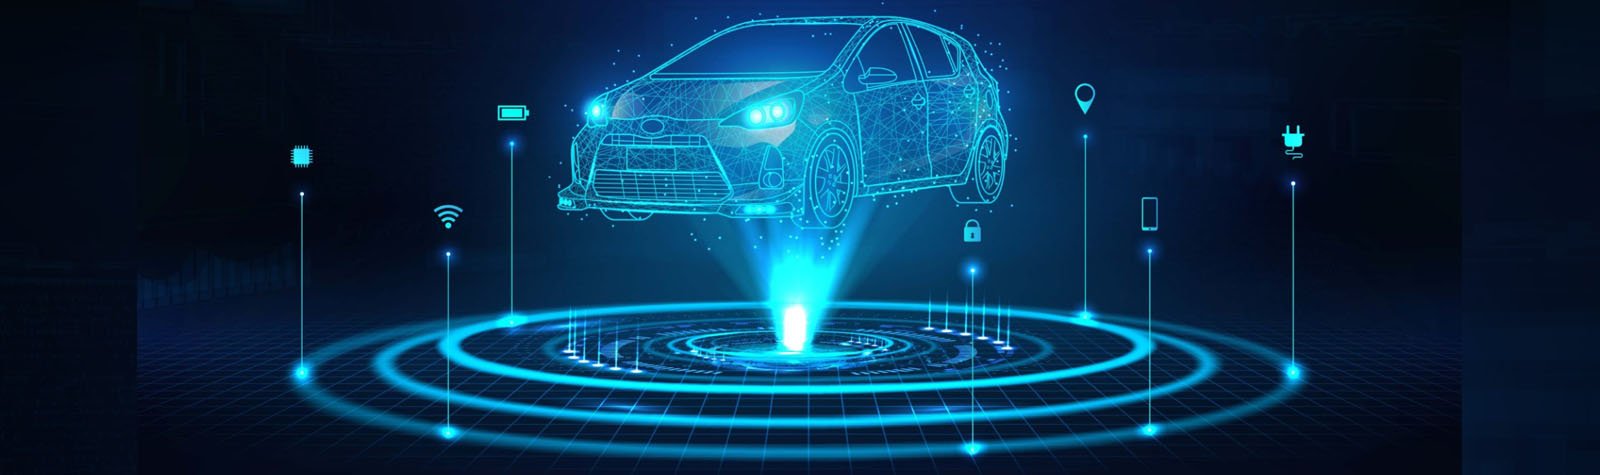 Connectivity to be a dominant driver of automobile value